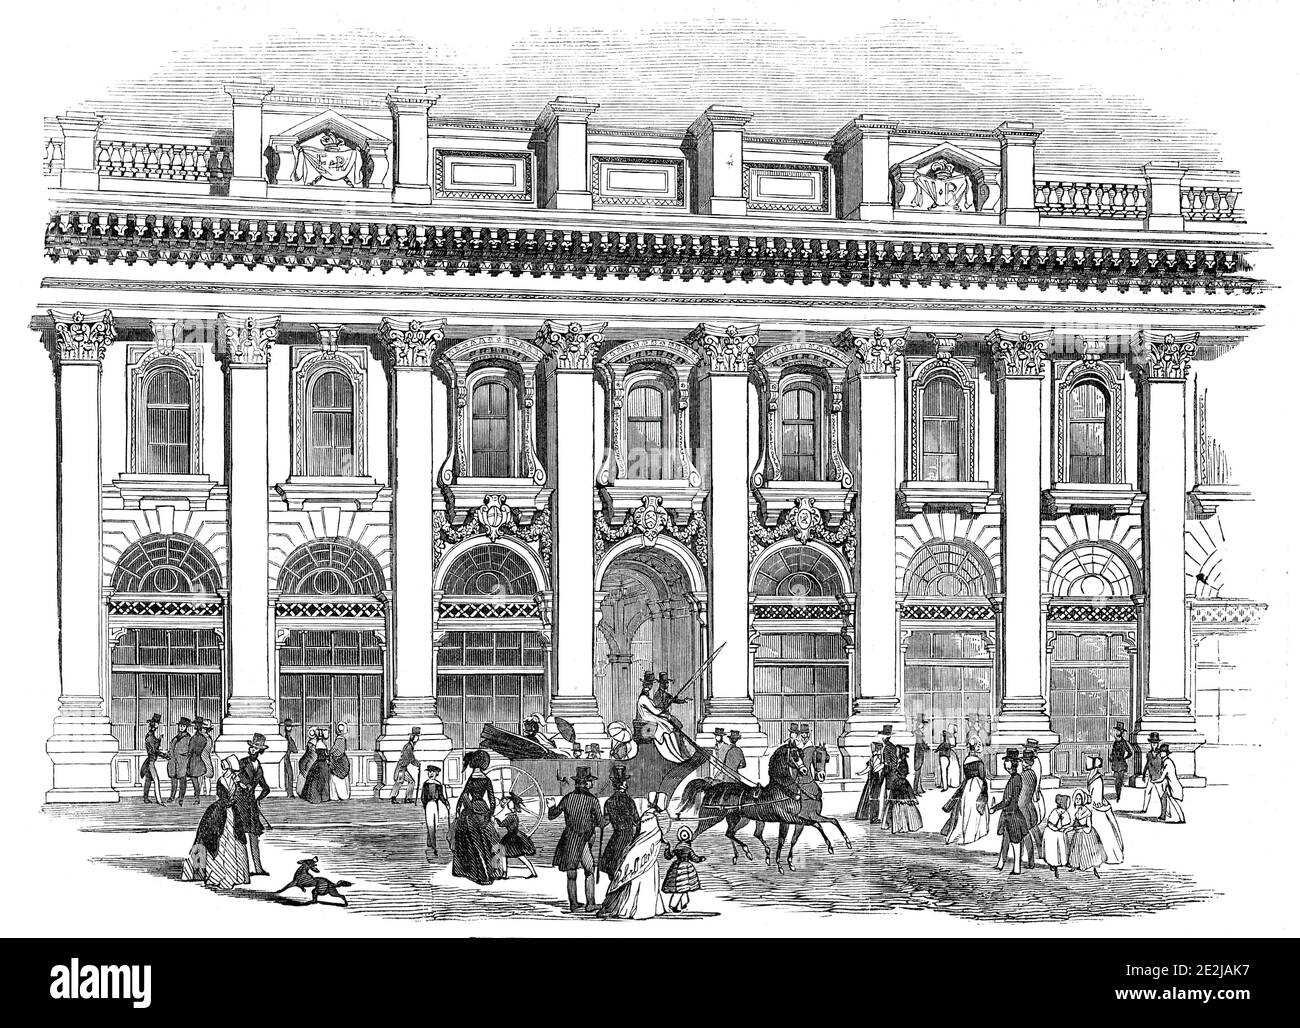 The new Royal Exchange - the south entrance, 1844. View of the Royal Exchange in the City of London, designed by Sir William Tite. From &quot;Illustrated London News&quot;, 1844, Vol V. Stock Photo